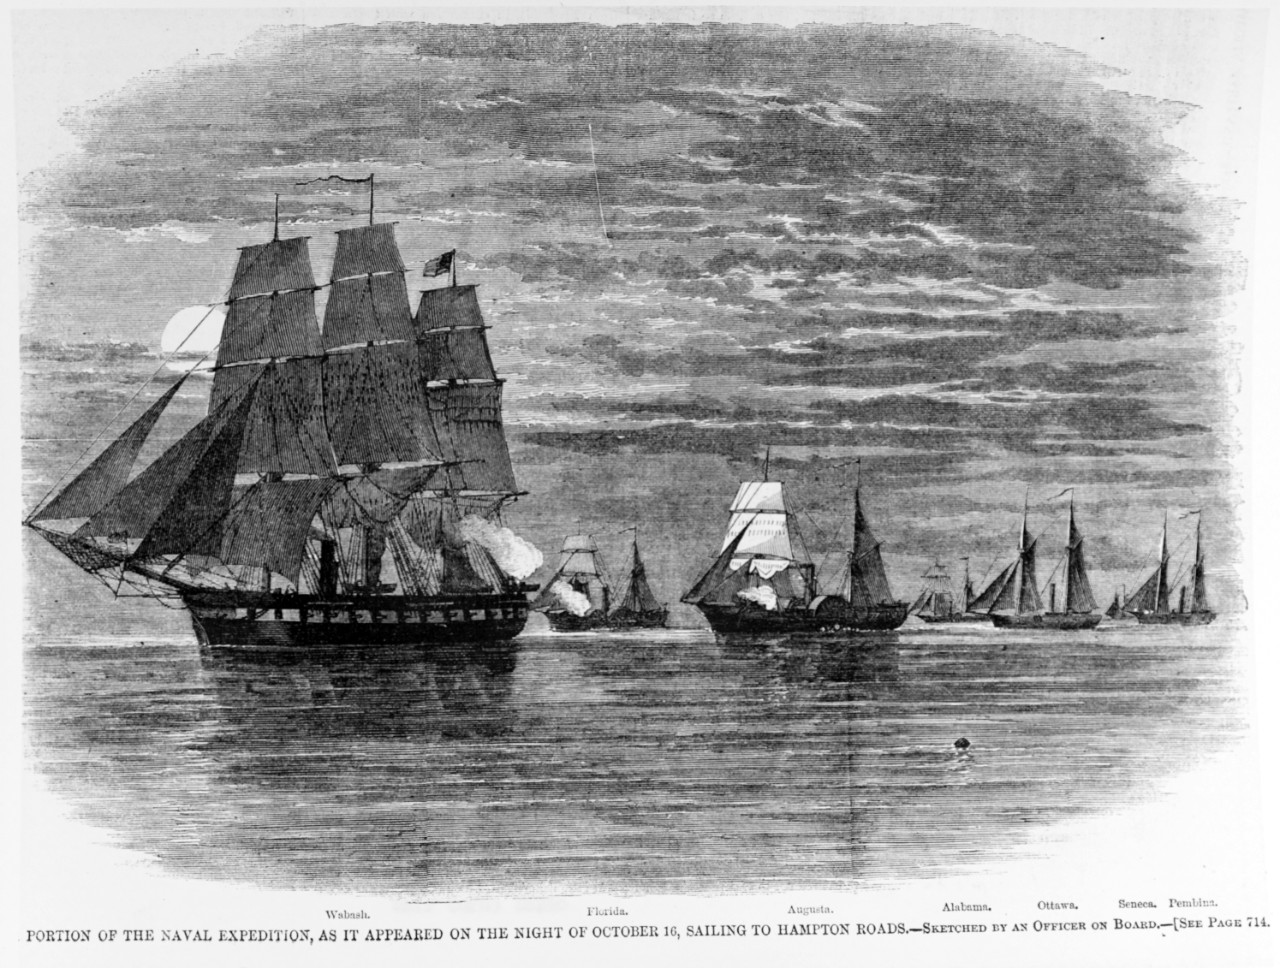 Photo #: NH 59316  &quot;Portion of the Naval Expedition, as it appeared on the night of October 16, sailing to Hampton Roads. -- Sketched by an Officer on Board.&quot; 1861